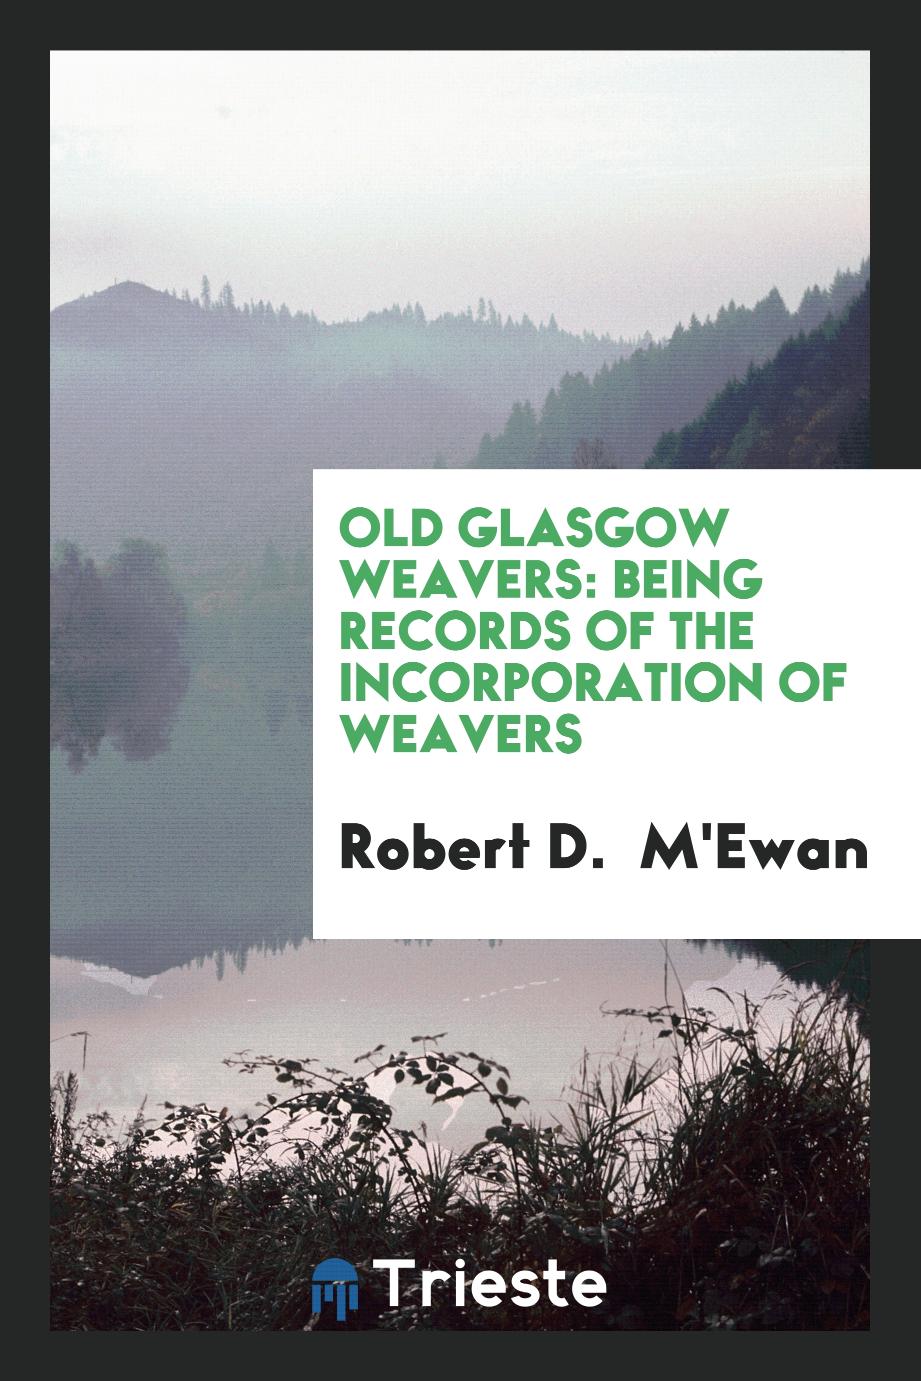 Old Glasgow Weavers: Being Records of the Incorporation of Weavers